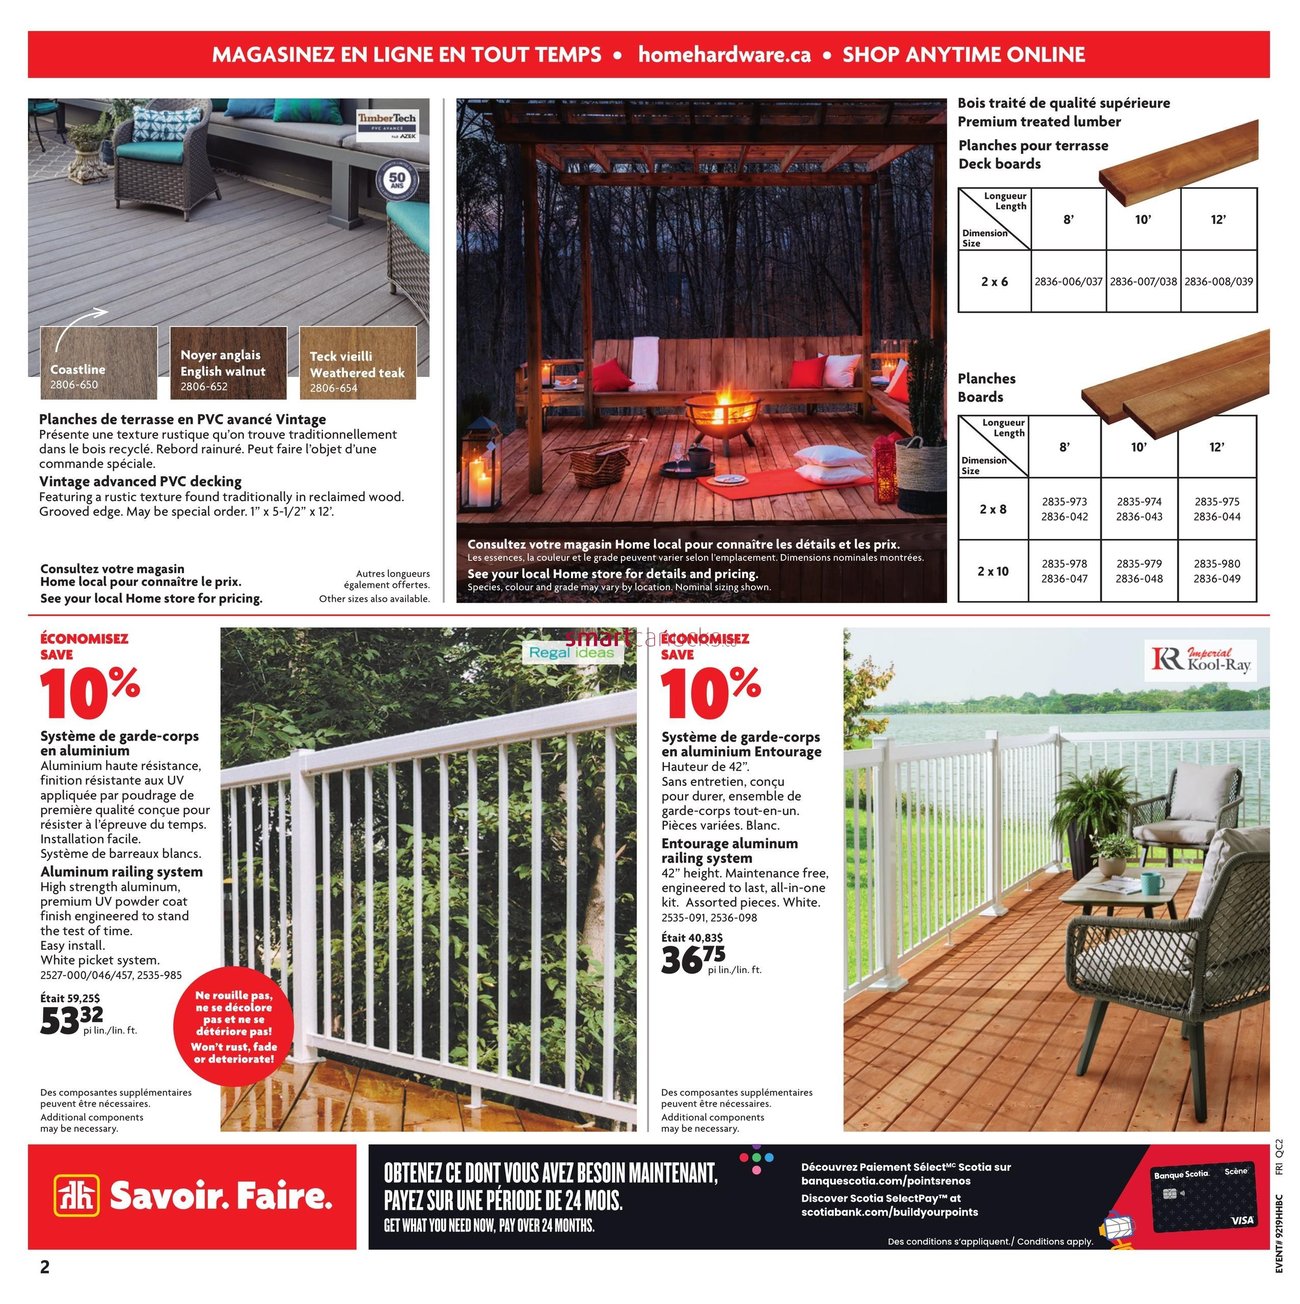 Home Hardware Building Centre - Quebec - 2 Weeks of Savings - Page 3